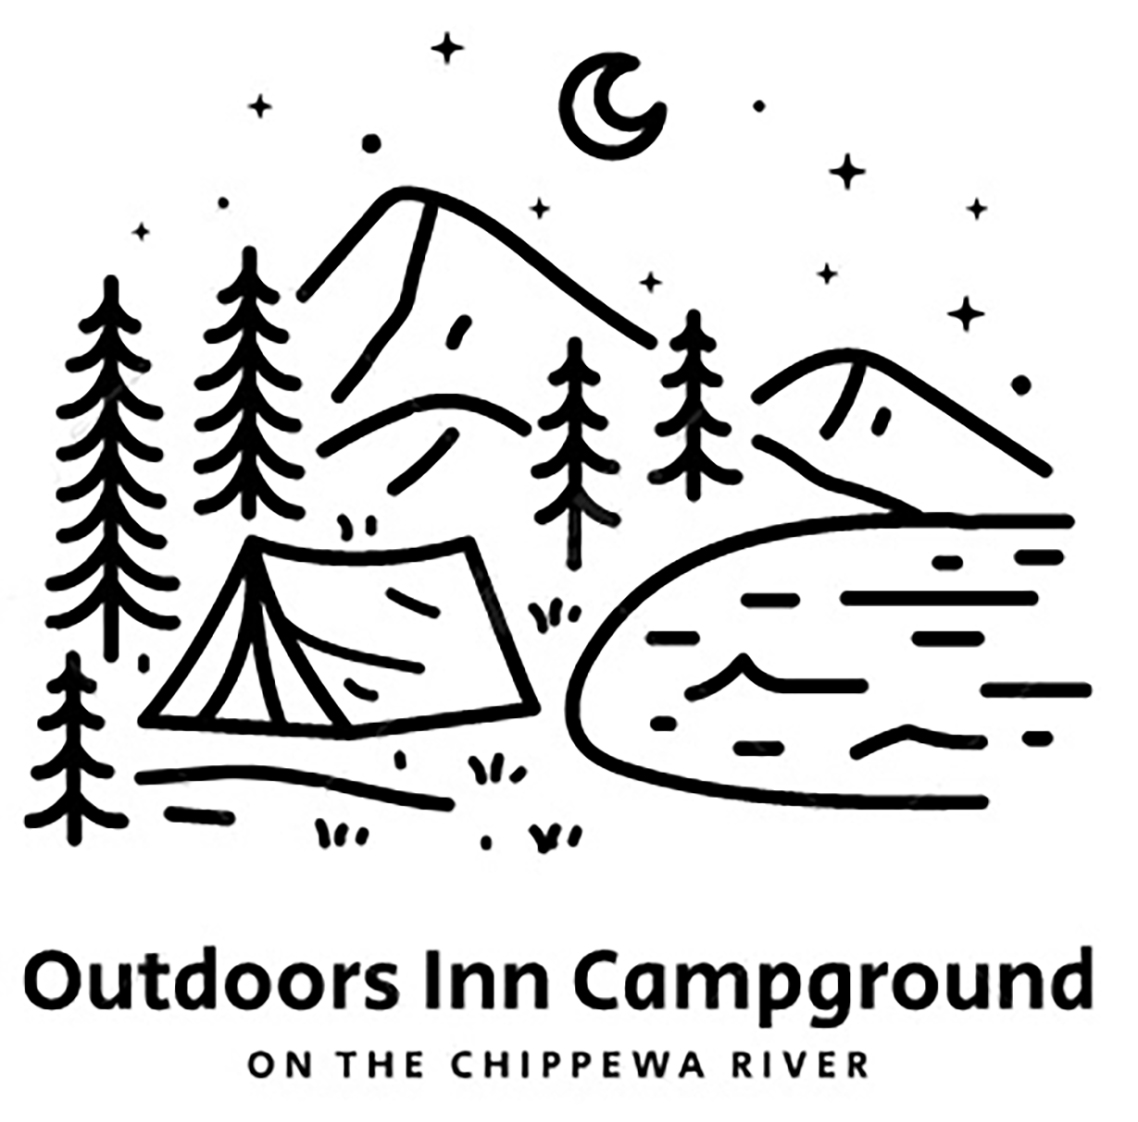 Outdoors Inn Campground